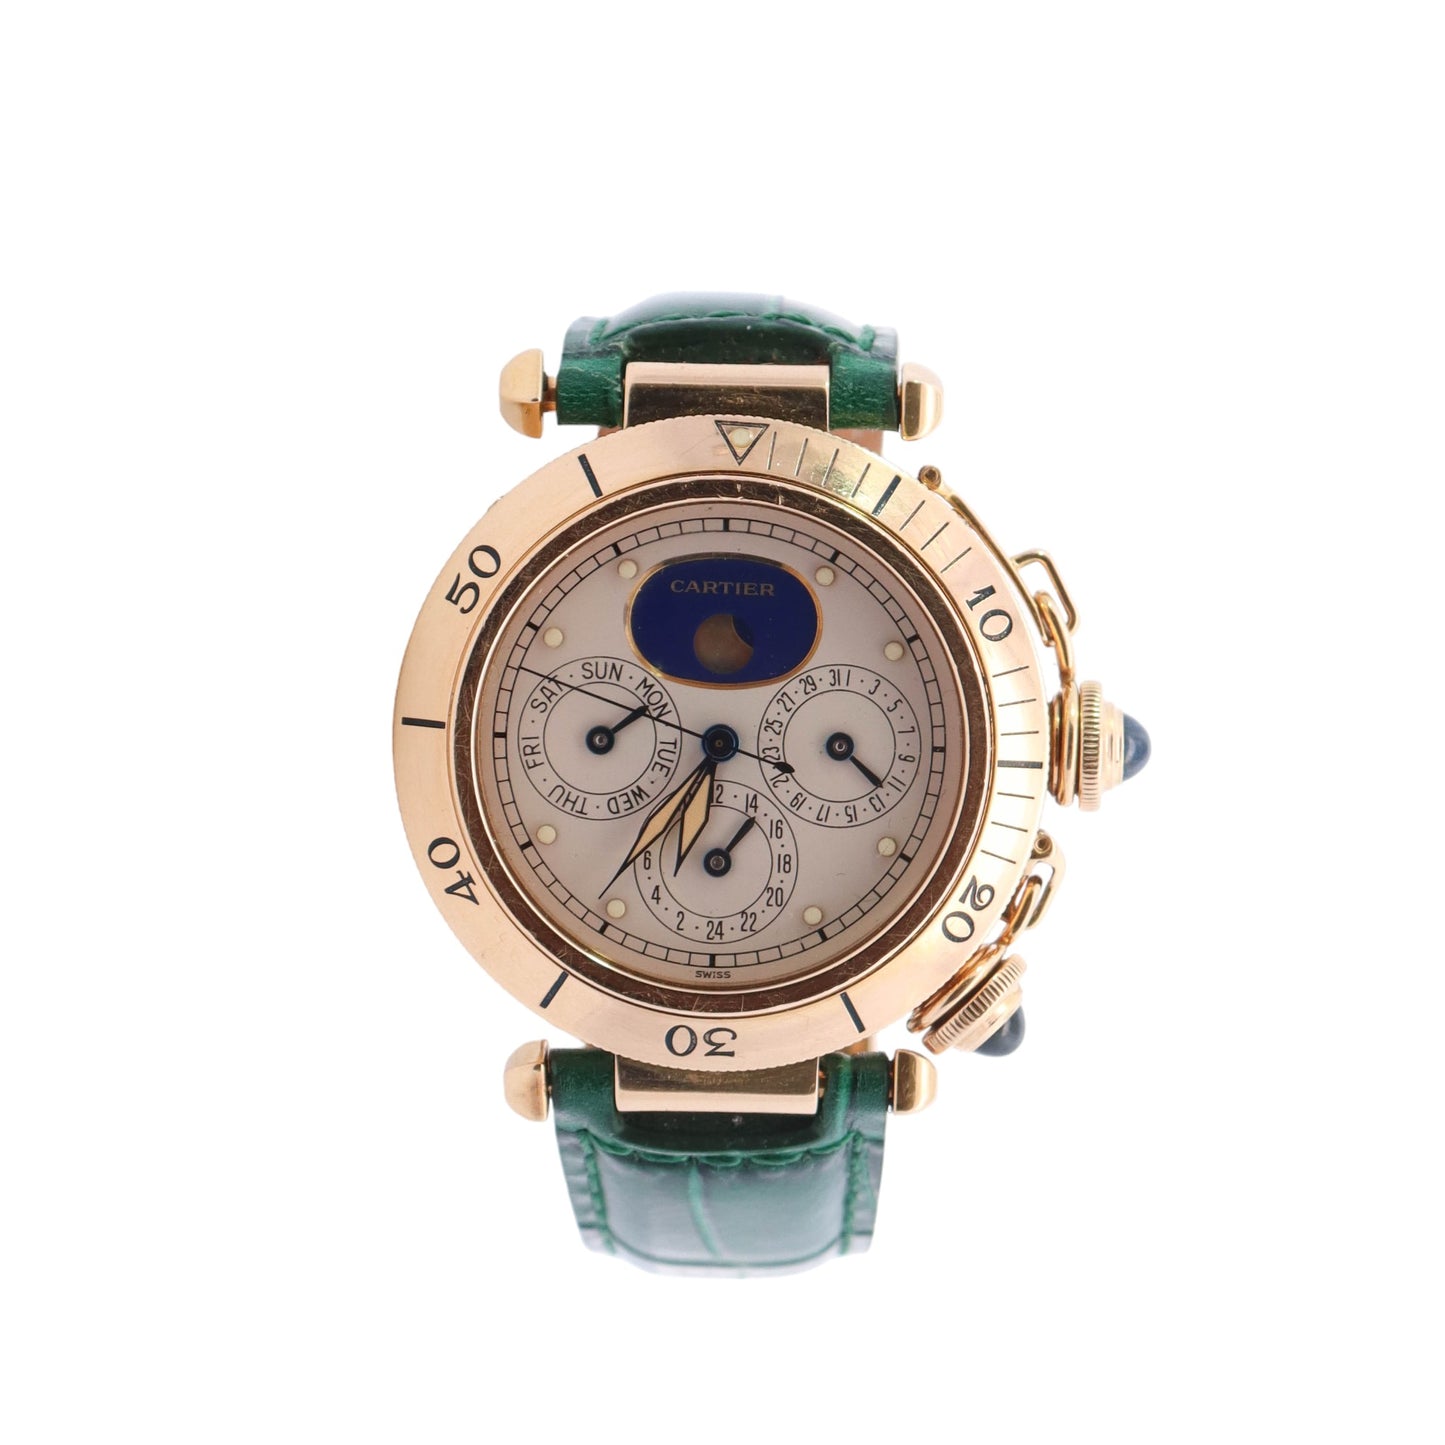 Cartier Pasha De Cartier Moonphase Dual Time Zone 18k Yellow Gold 38mm Ivory Moonphase Dot Dial Watch Reference #: 30002